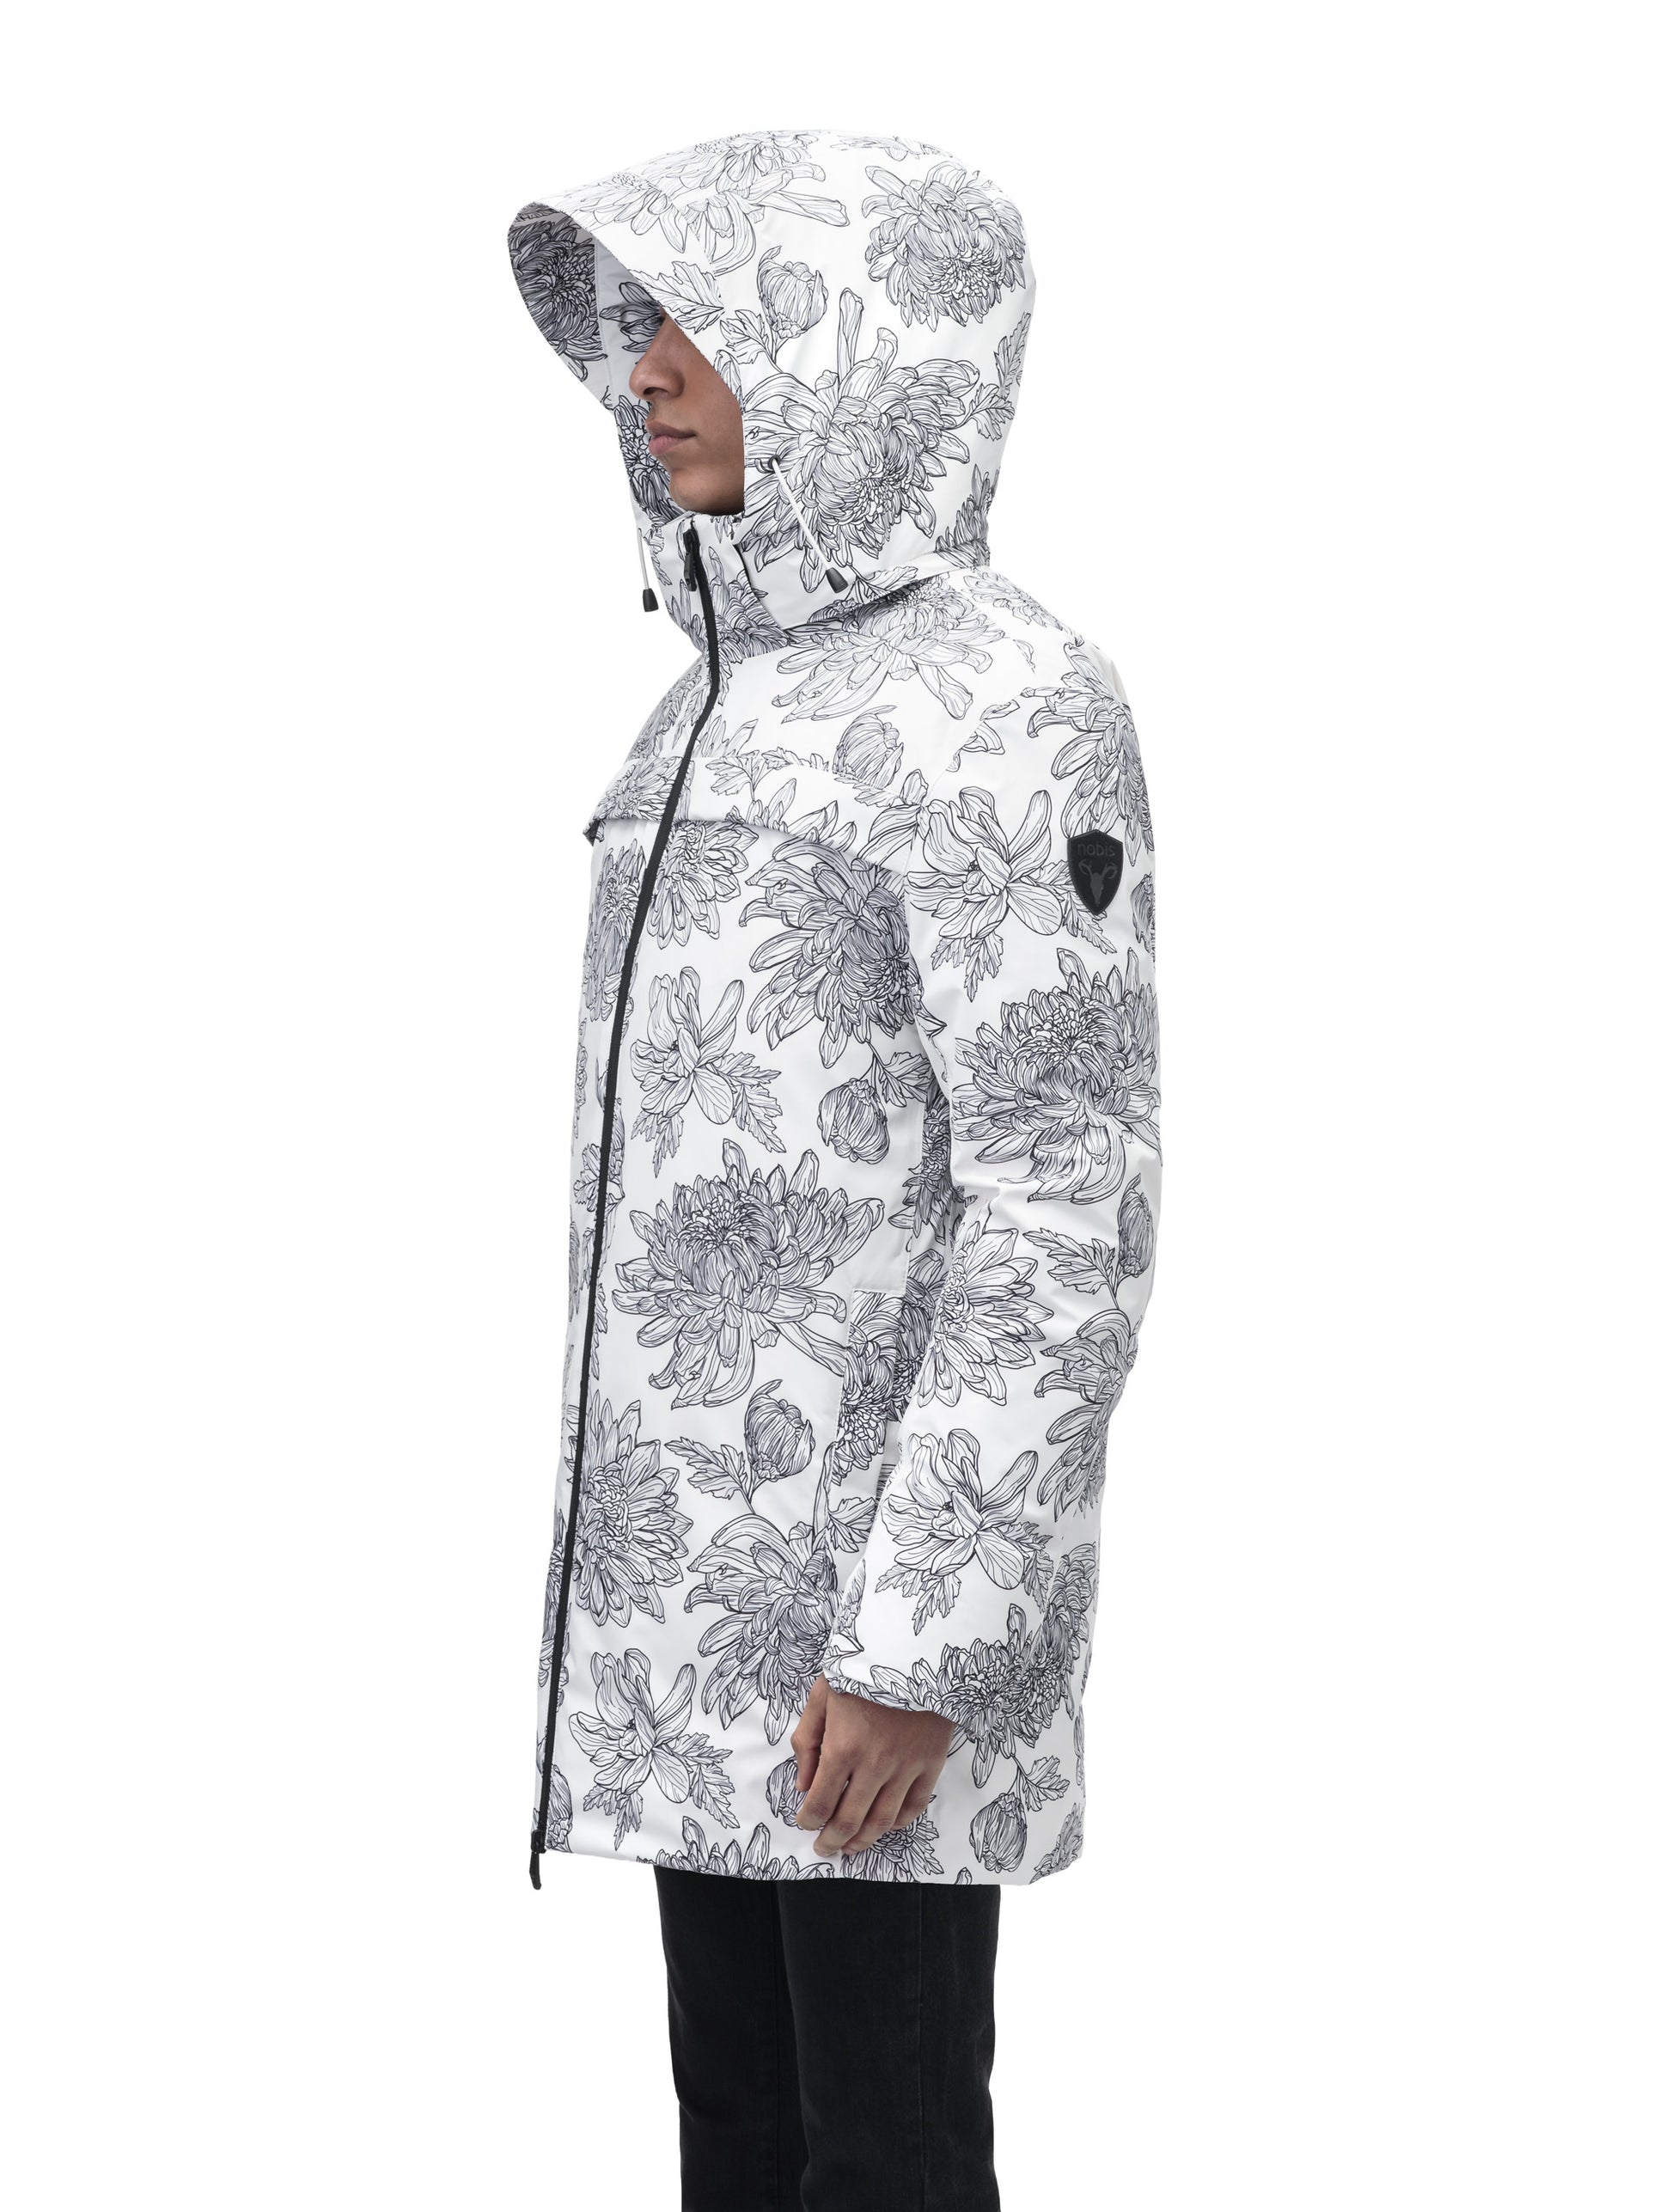 Atlas Men's Performance Parka in thigh length, Canadian duck down insulation, removable hood, and two-way zipper, in White Floral